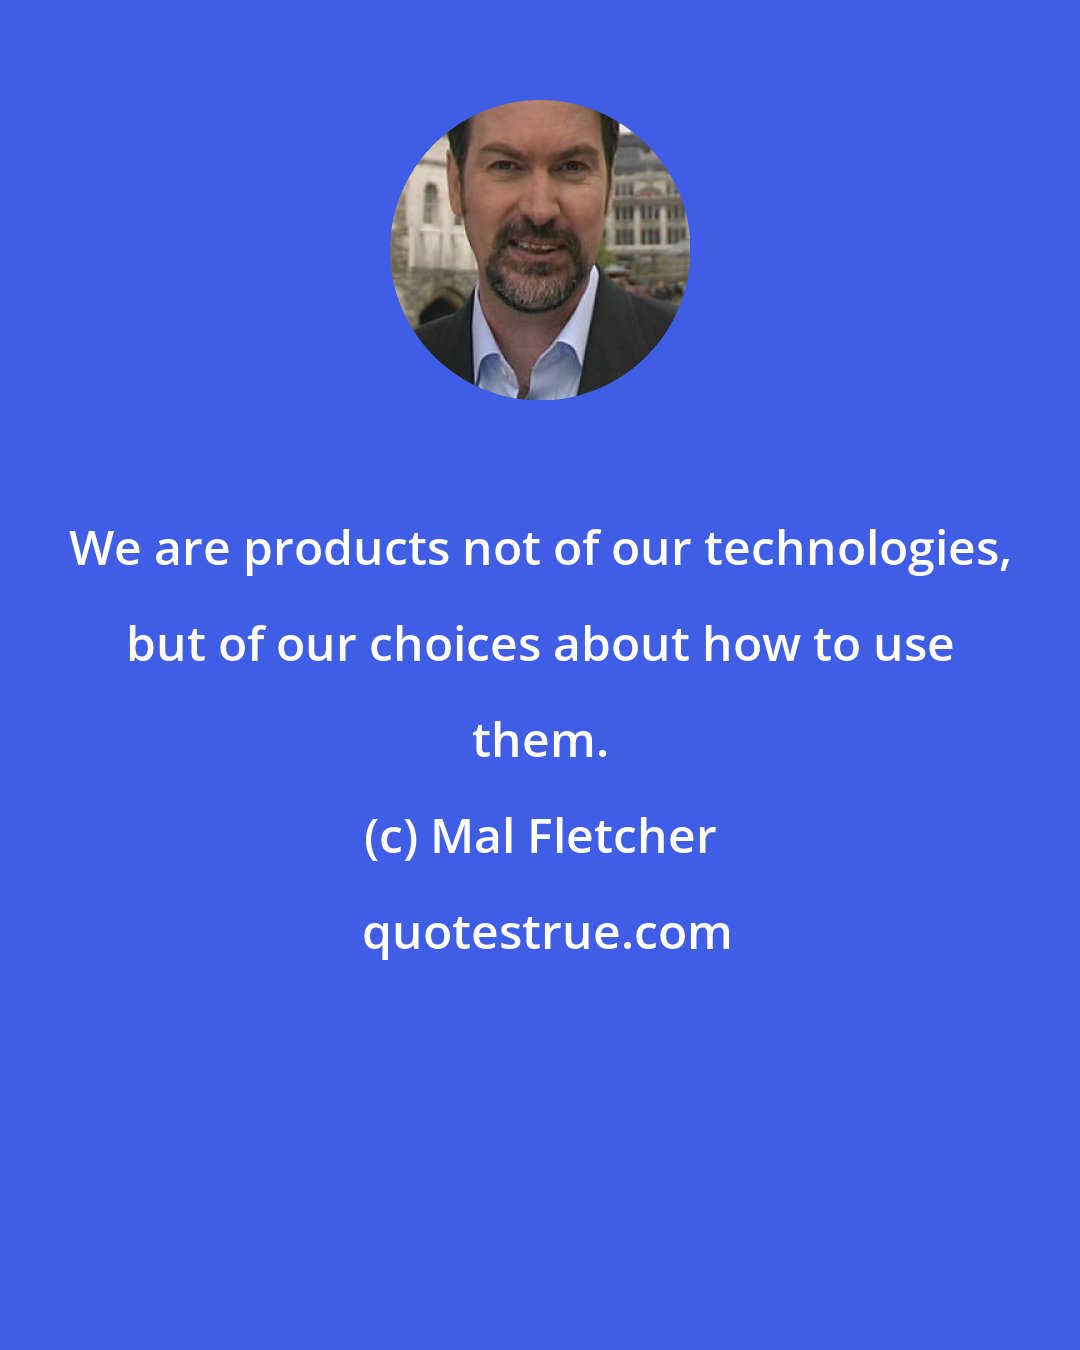 Mal Fletcher: We are products not of our technologies, but of our choices about how to use them.